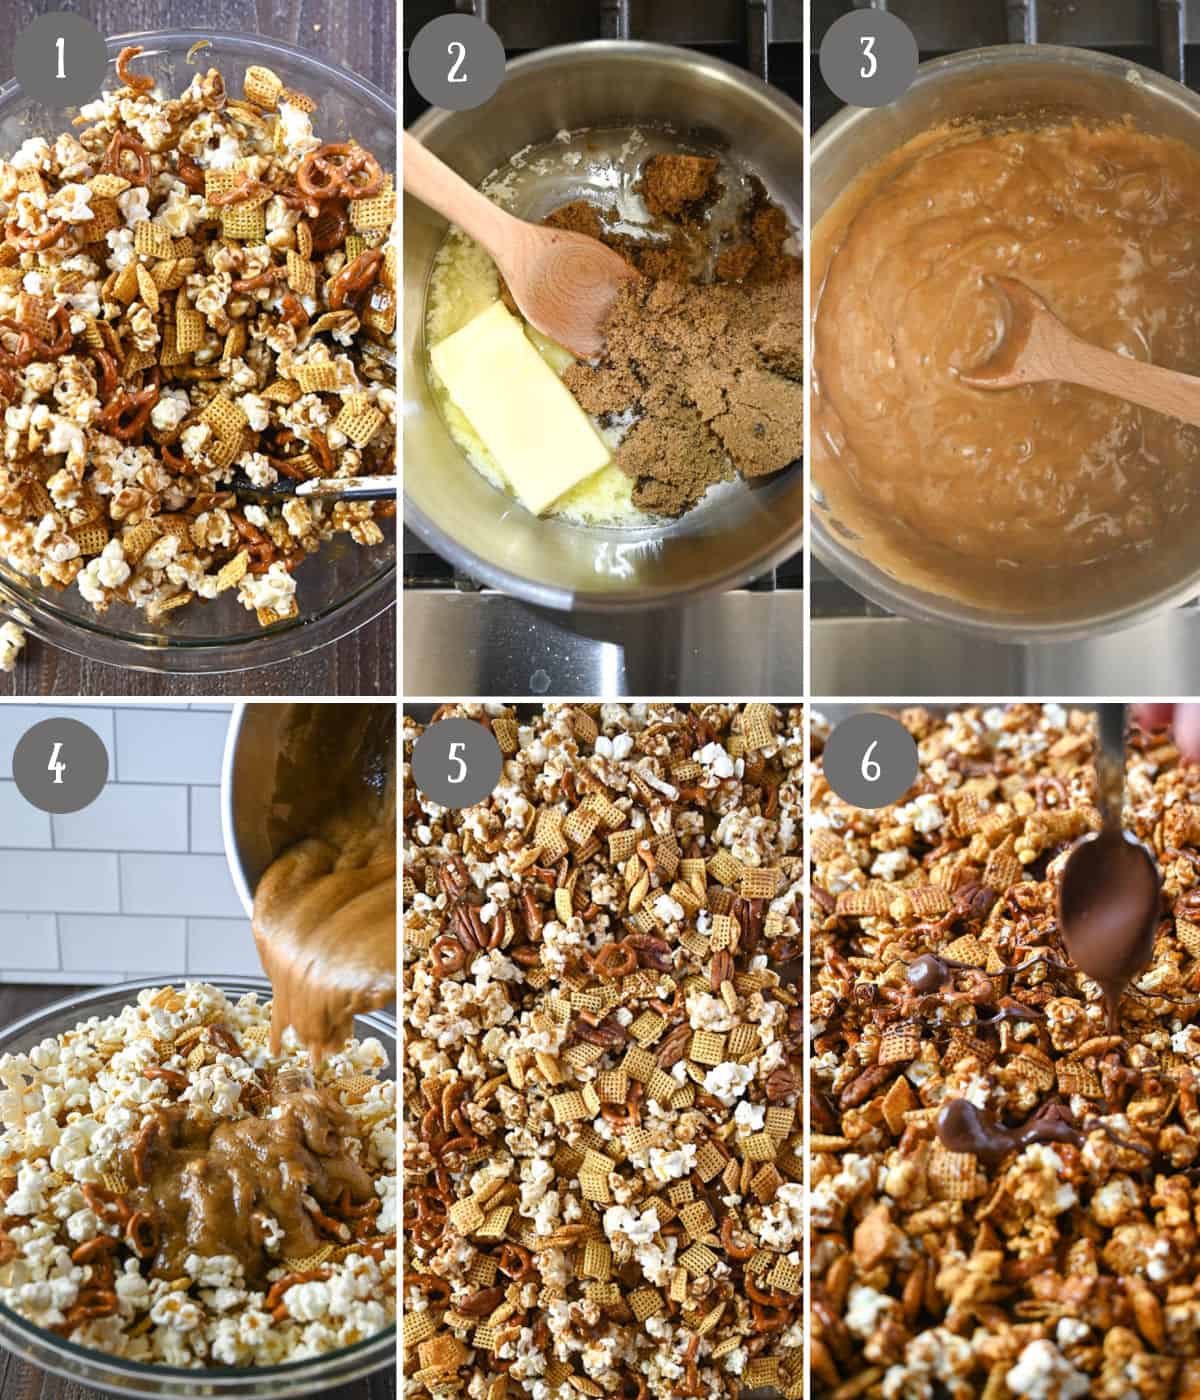 Six process photos. First one, a bowl full of popcorn, chex, pecans and pretzels. Secone one, a saucepan with butter and brown sugar melting. Third one, caramel all simmered and melted. Fourth one, sauce being poured over the mix. Fifth one, caramel snack mix poured on a baking sheet. Sixth one, caramel snack mix done baking.